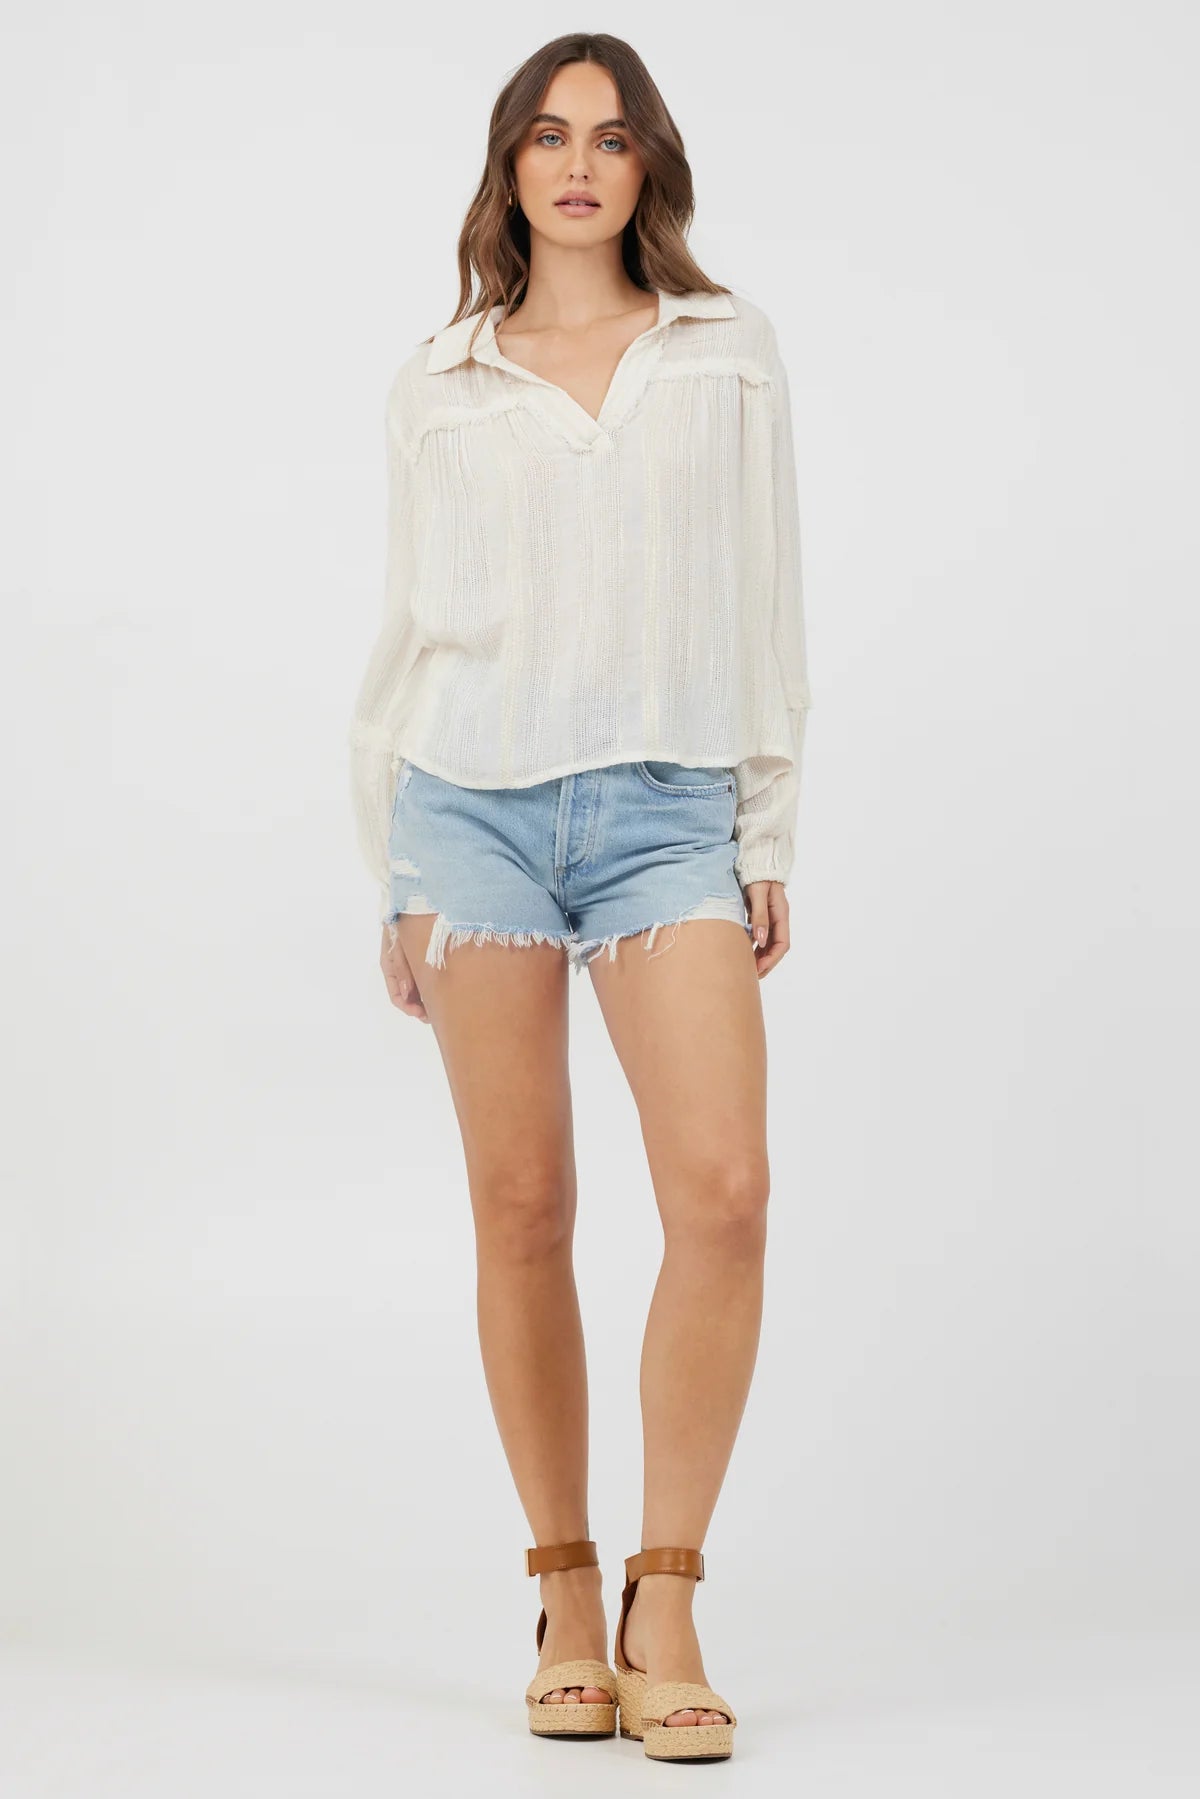 The Ivory Multi Texture Polo Blouse